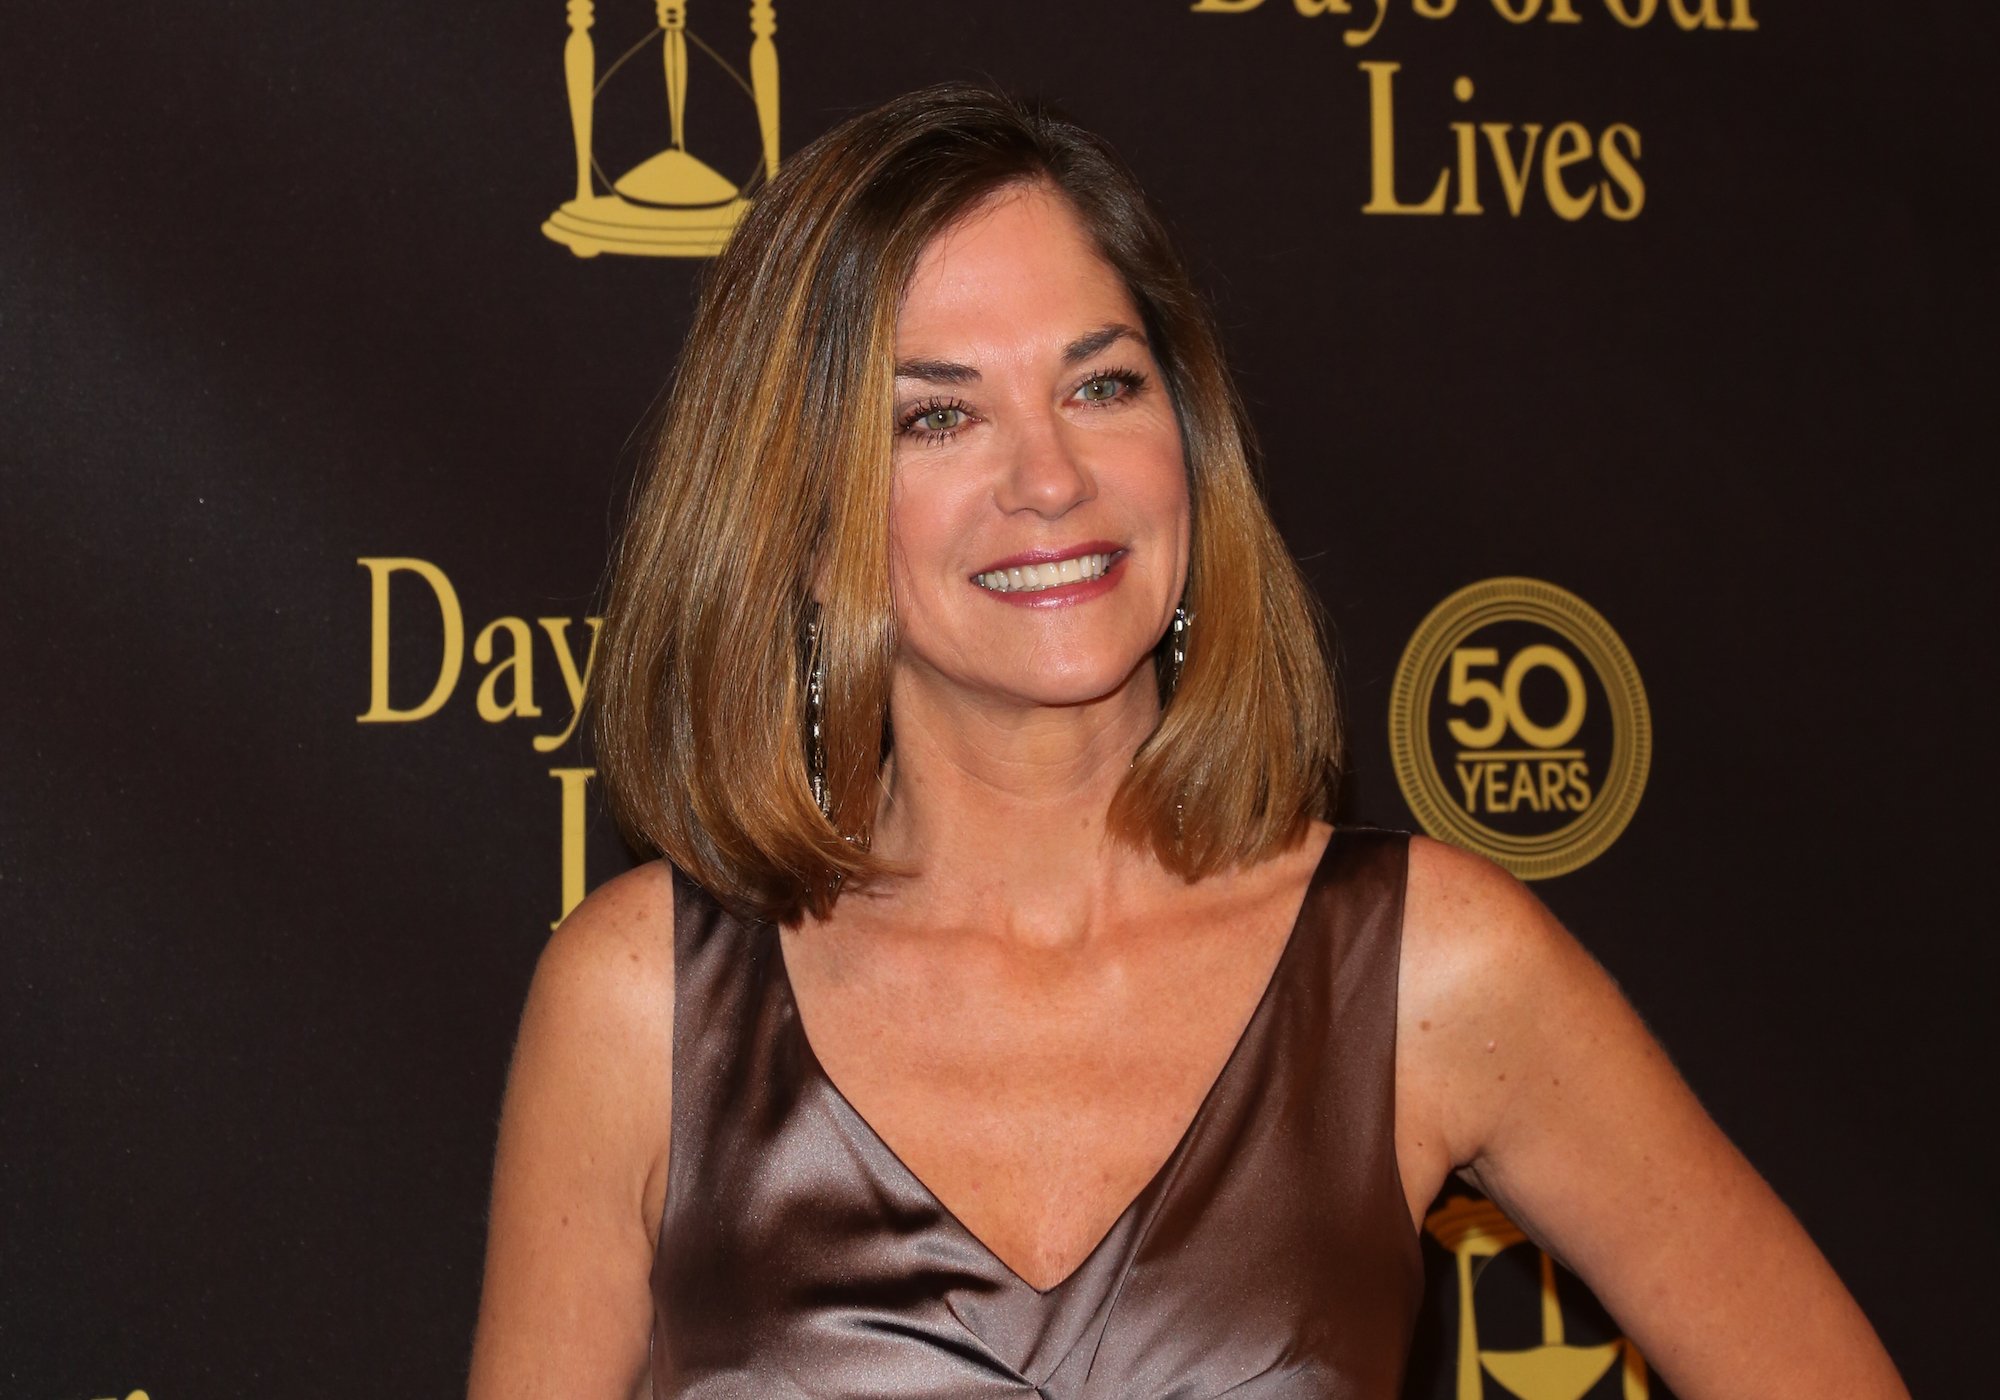 Kassie Depaiva smiling in front of a brown backdrop with the 'Days of our Lives' logo